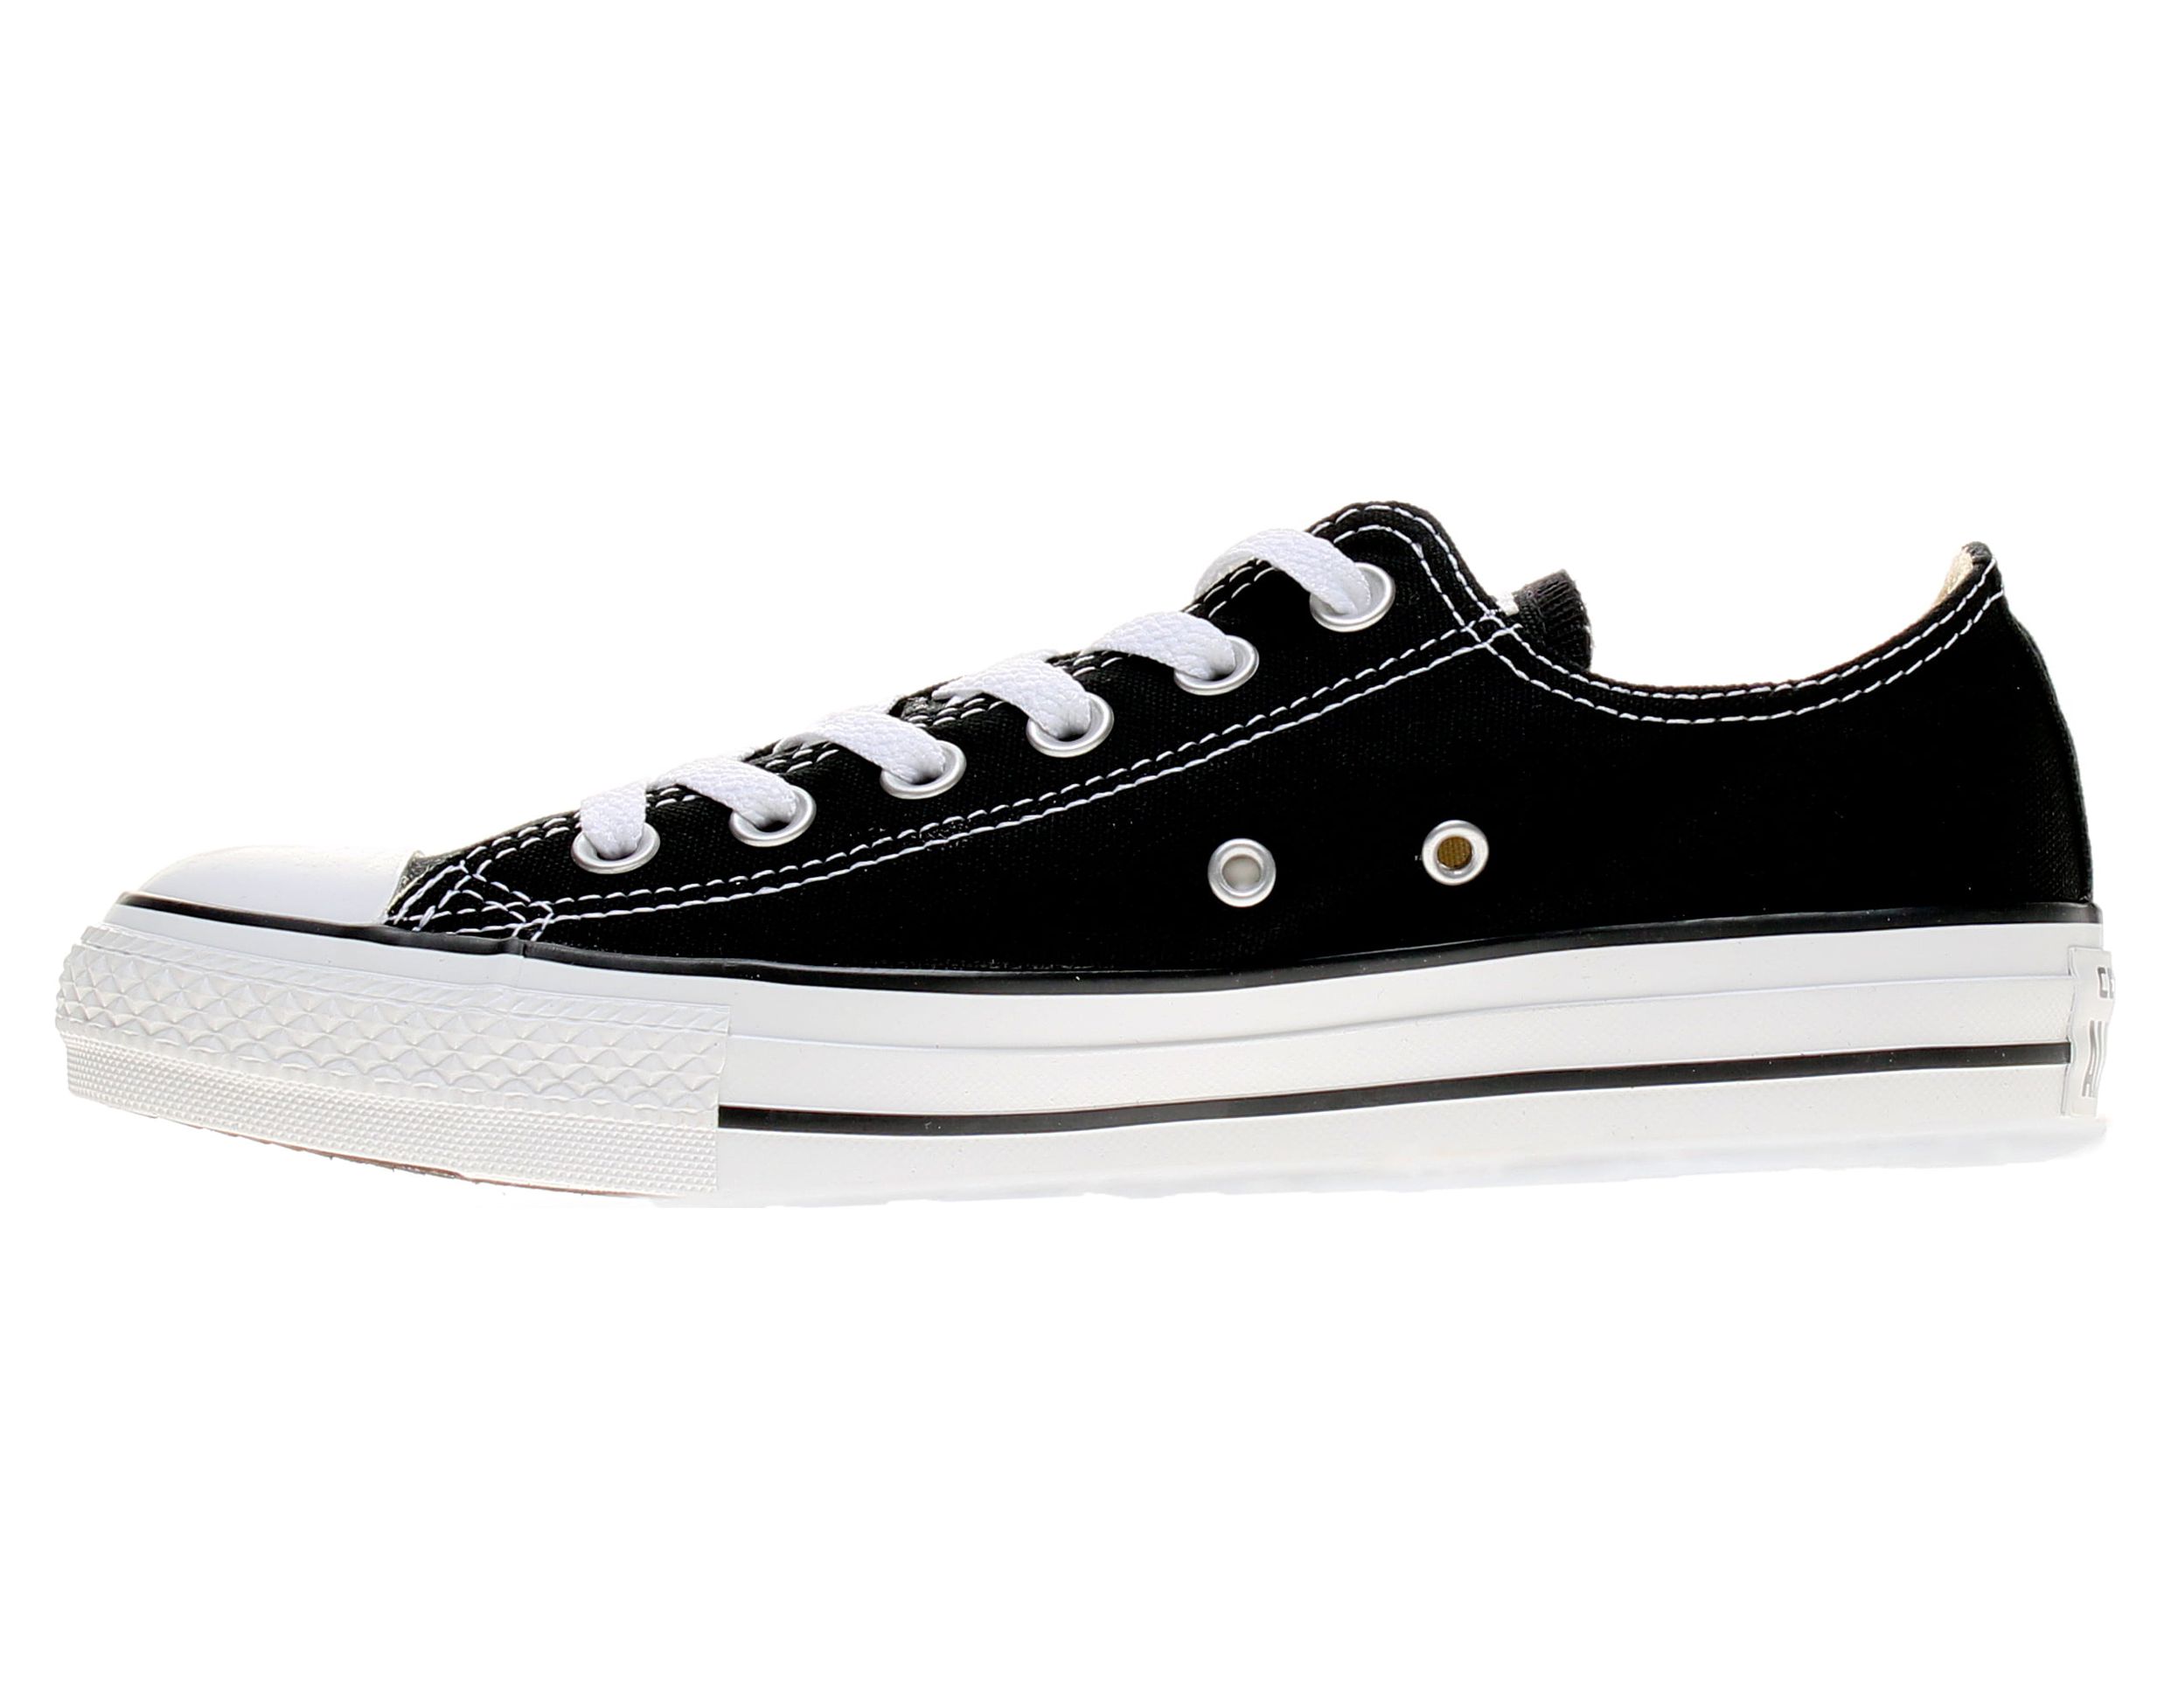 Converse Unisex Chuck Taylor All Star Low Top - image 3 of 6